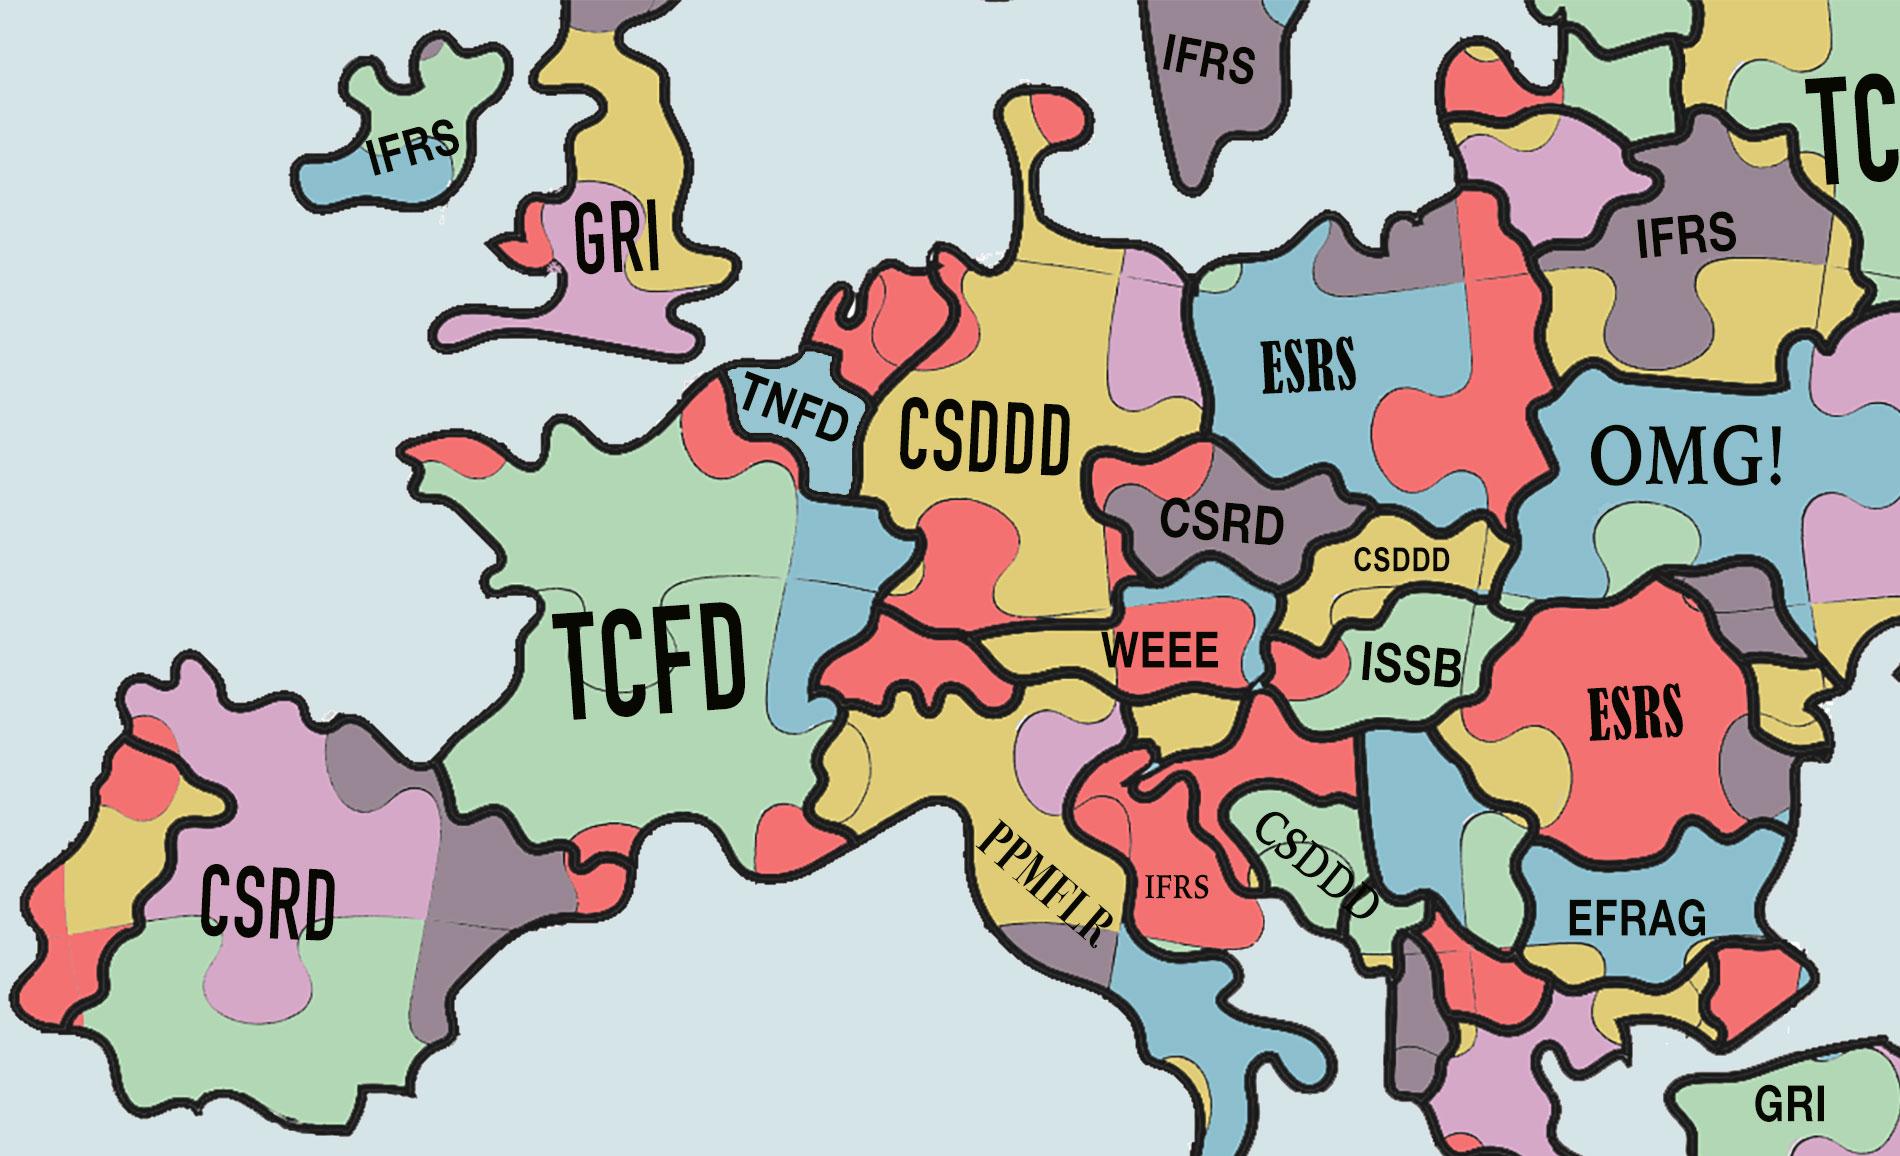 CSRD, CSDDD, ESRS and more: A cheat sheet of EU sustainability regulations